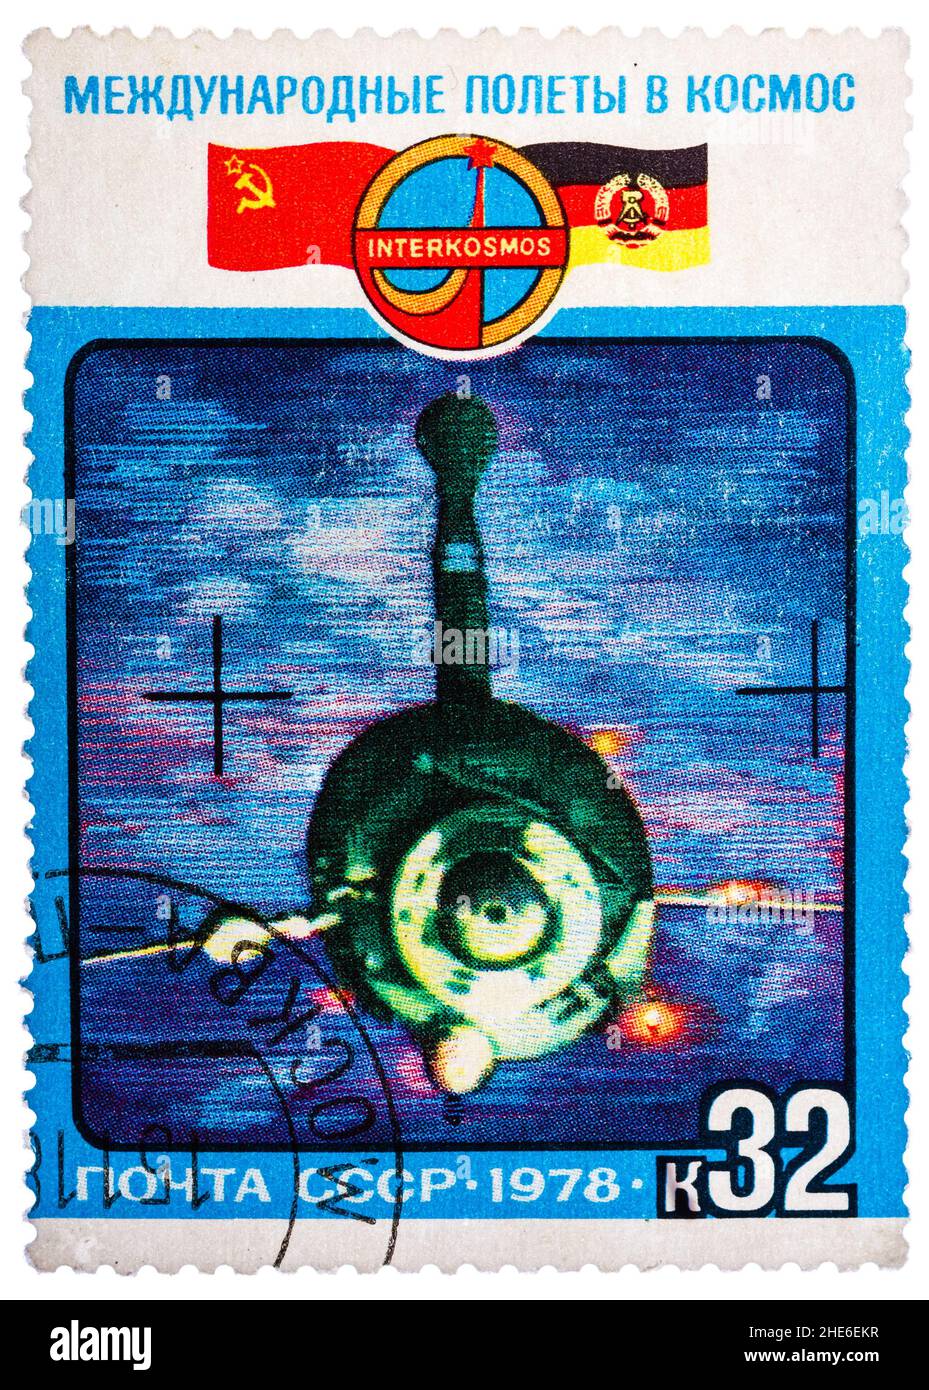 Stamp printed in USSR (Russia) shows cooperation USSR and GDR (East Germany) into space, with inscriptions and name of series 'International Flights Stock Photo